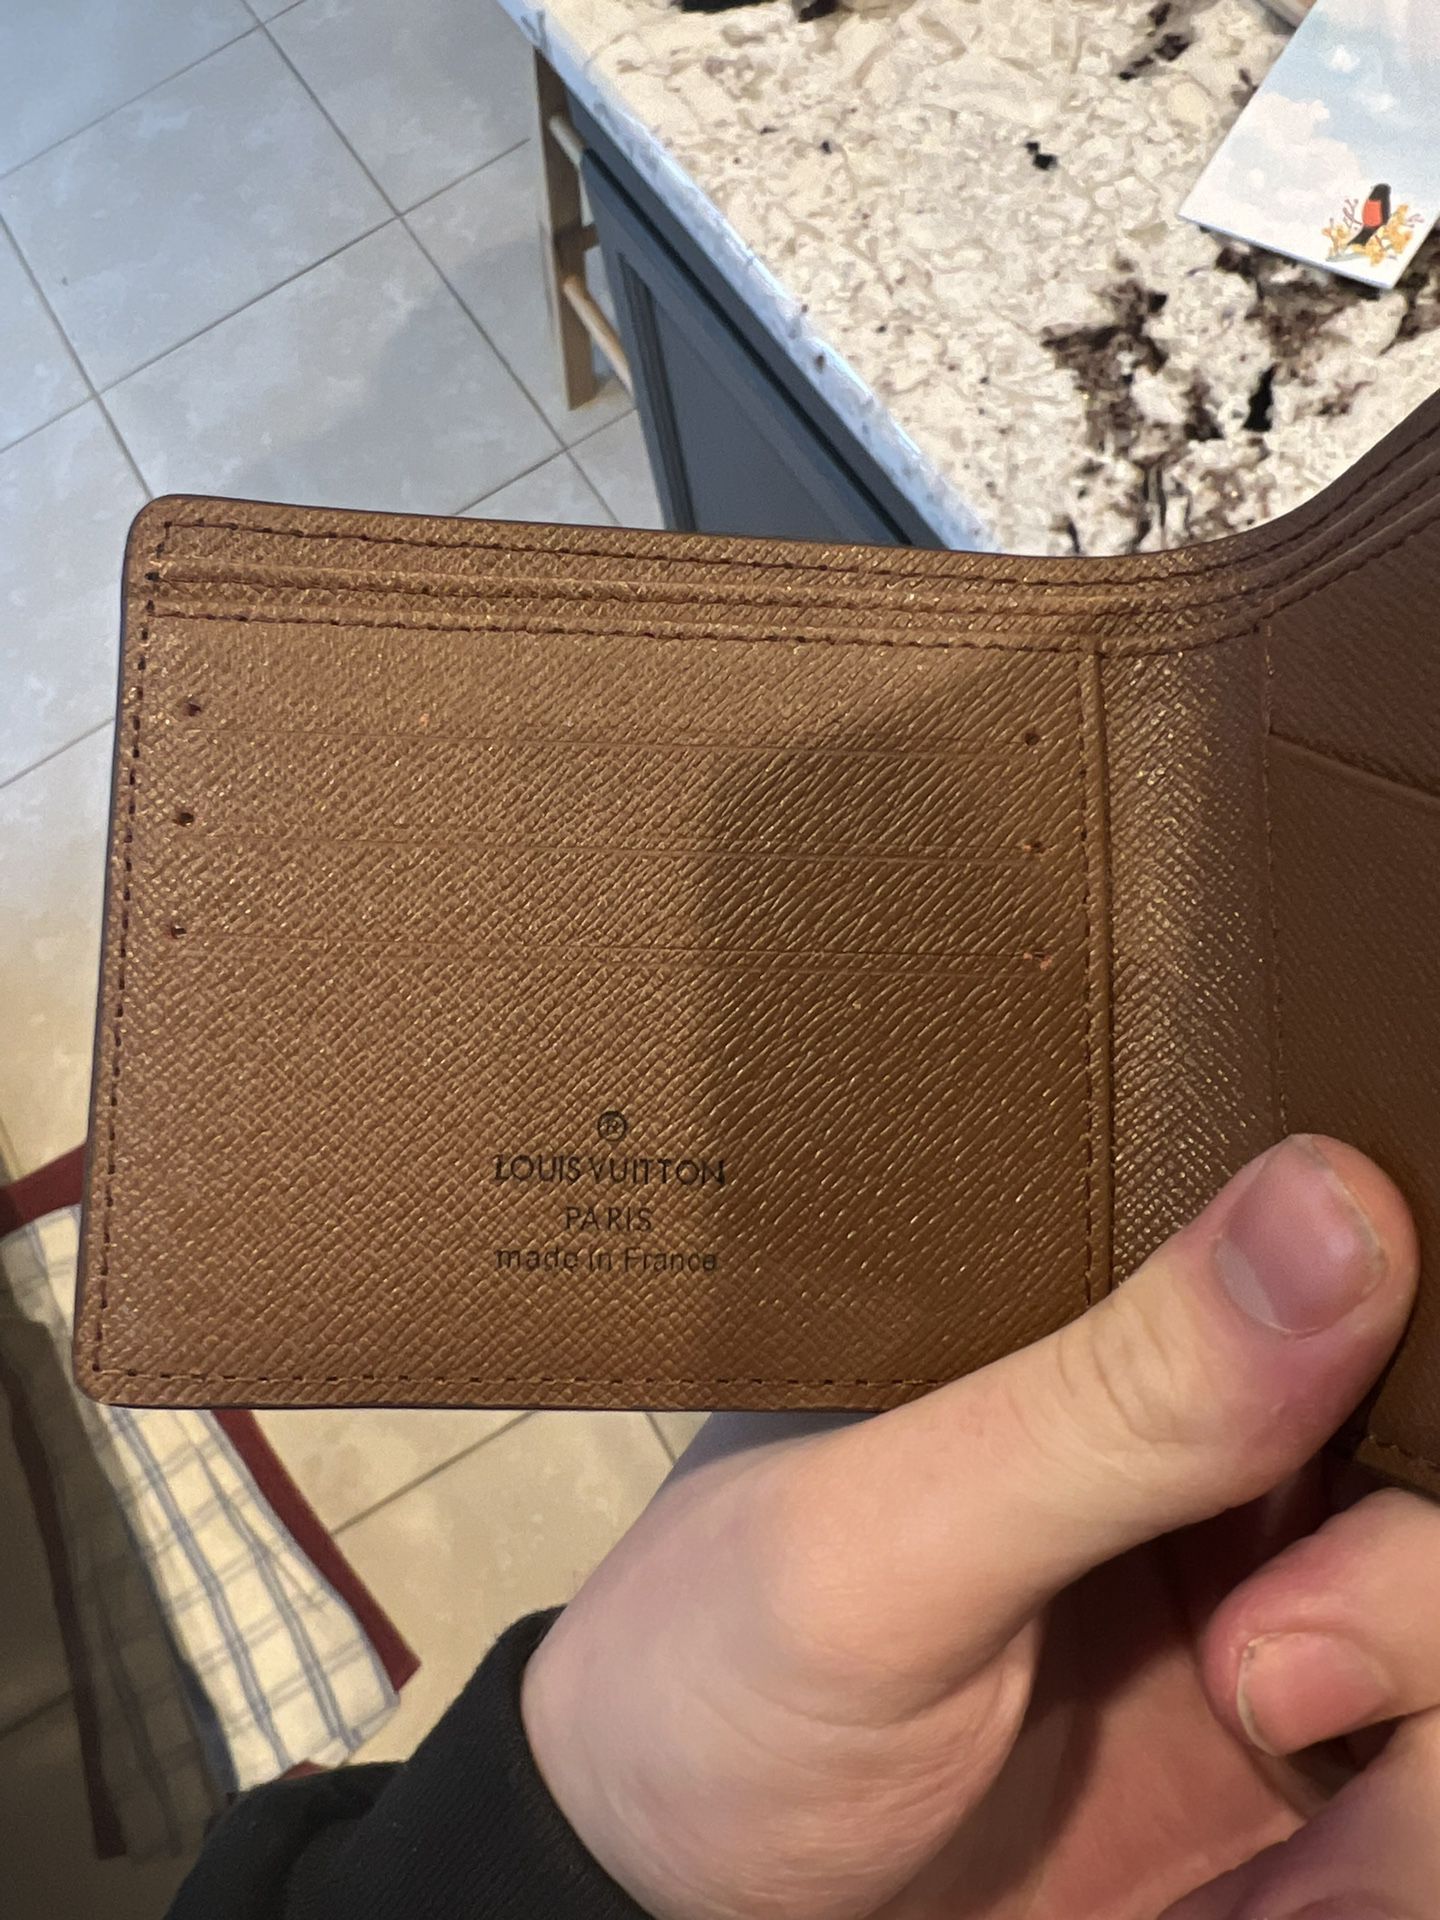 Louis Vuitton “Old Flower” Wallet For Men for Sale in Holly, MI